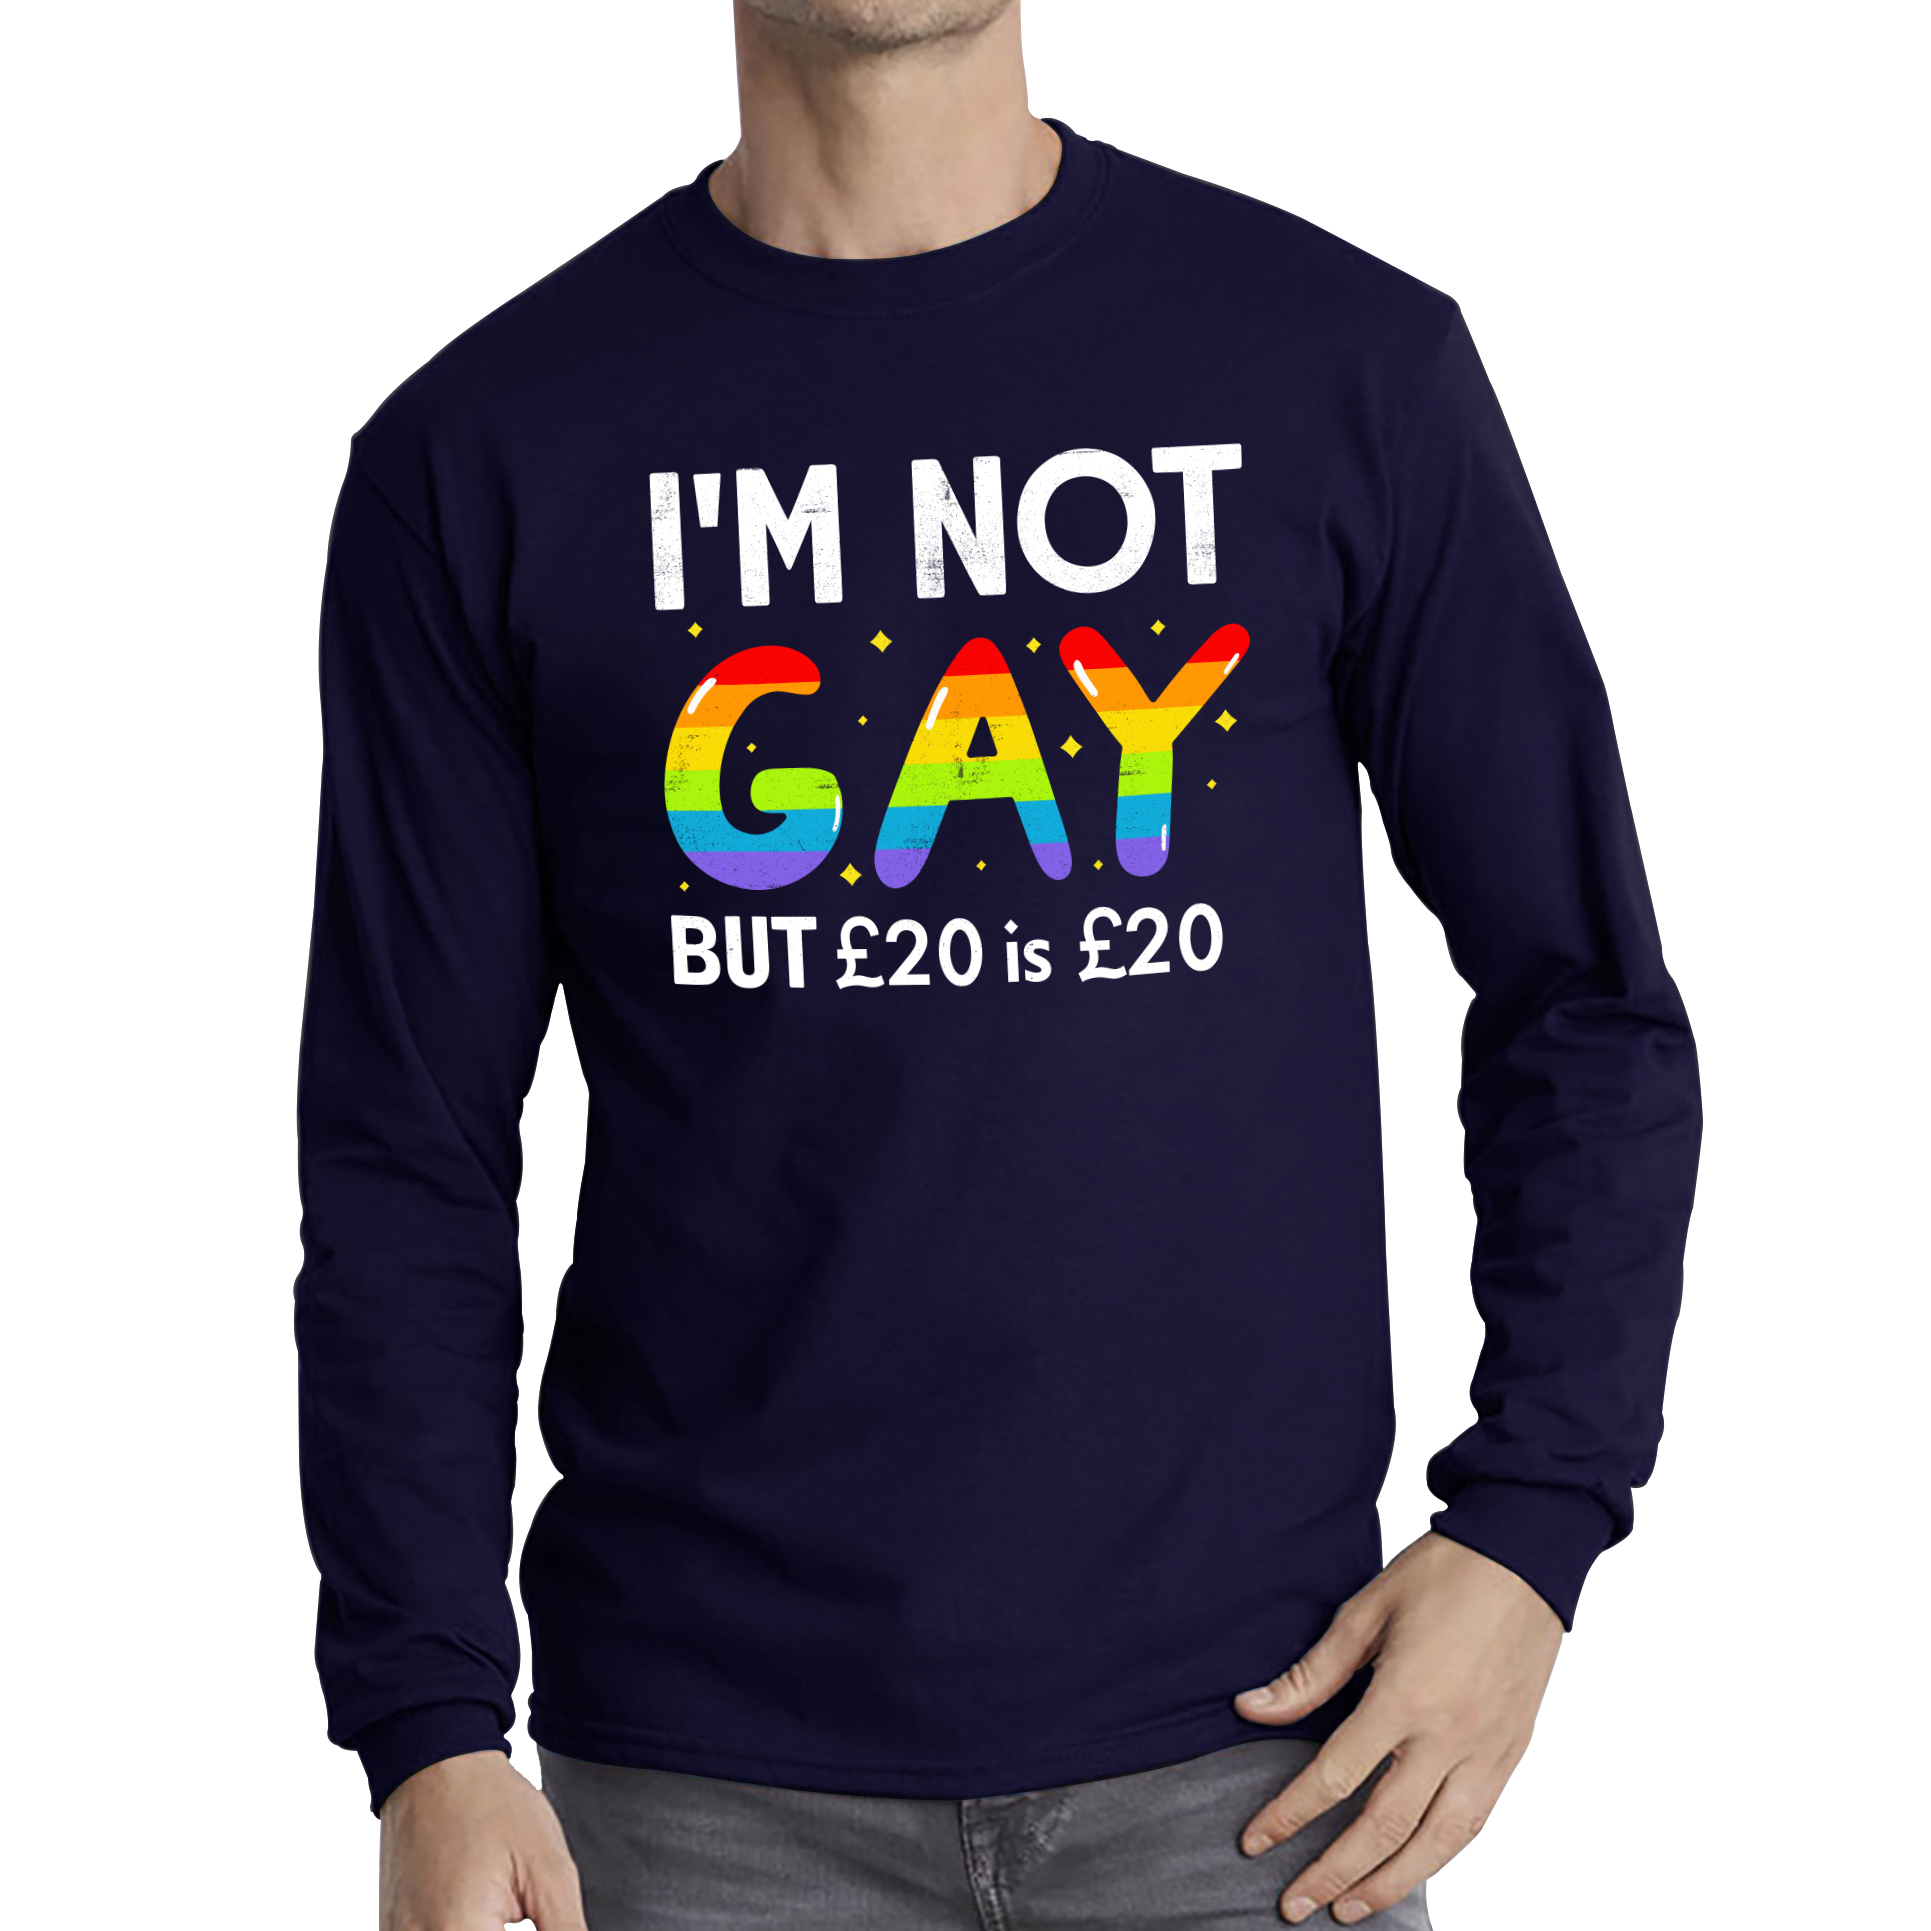 I'm Not Gay But 20 Pounds Is 20 Pounds Shirt Funny LGBT Gay Pride Joke Adult Long Sleeve T Shirt